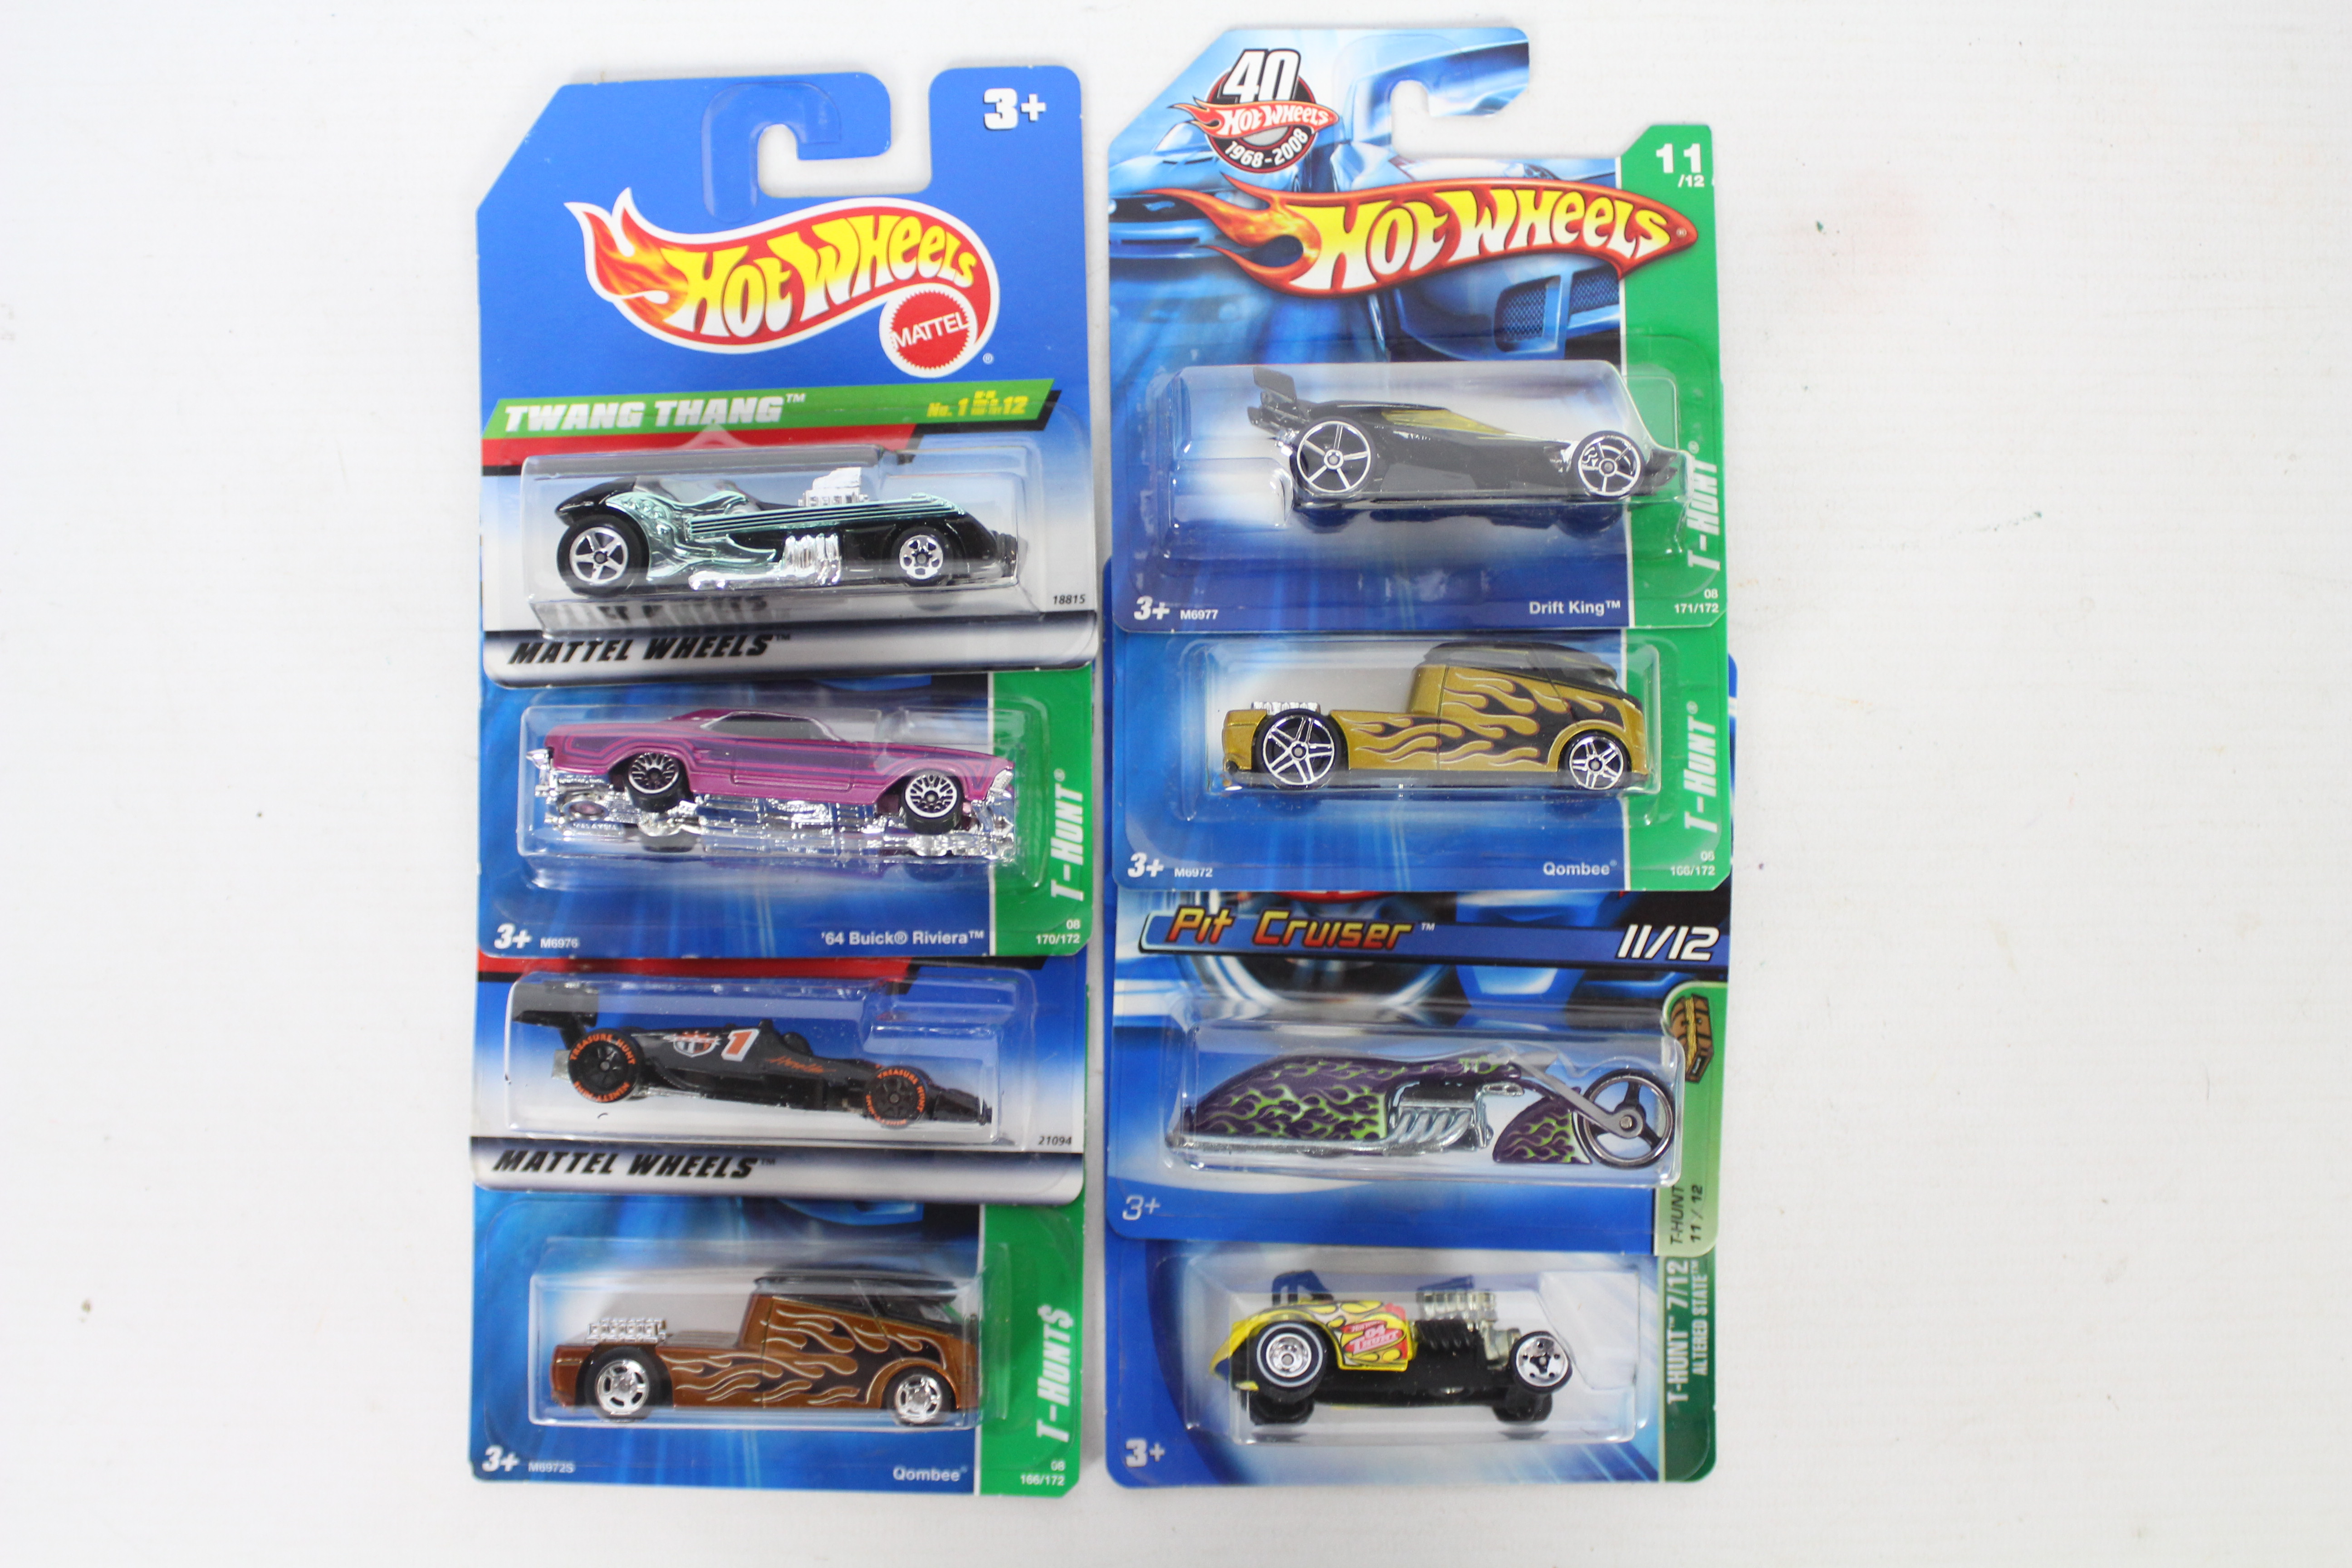 Hot Wheels - Treasure Hunt - Super Treasure Hunt - 8 x unopened models from the sought after